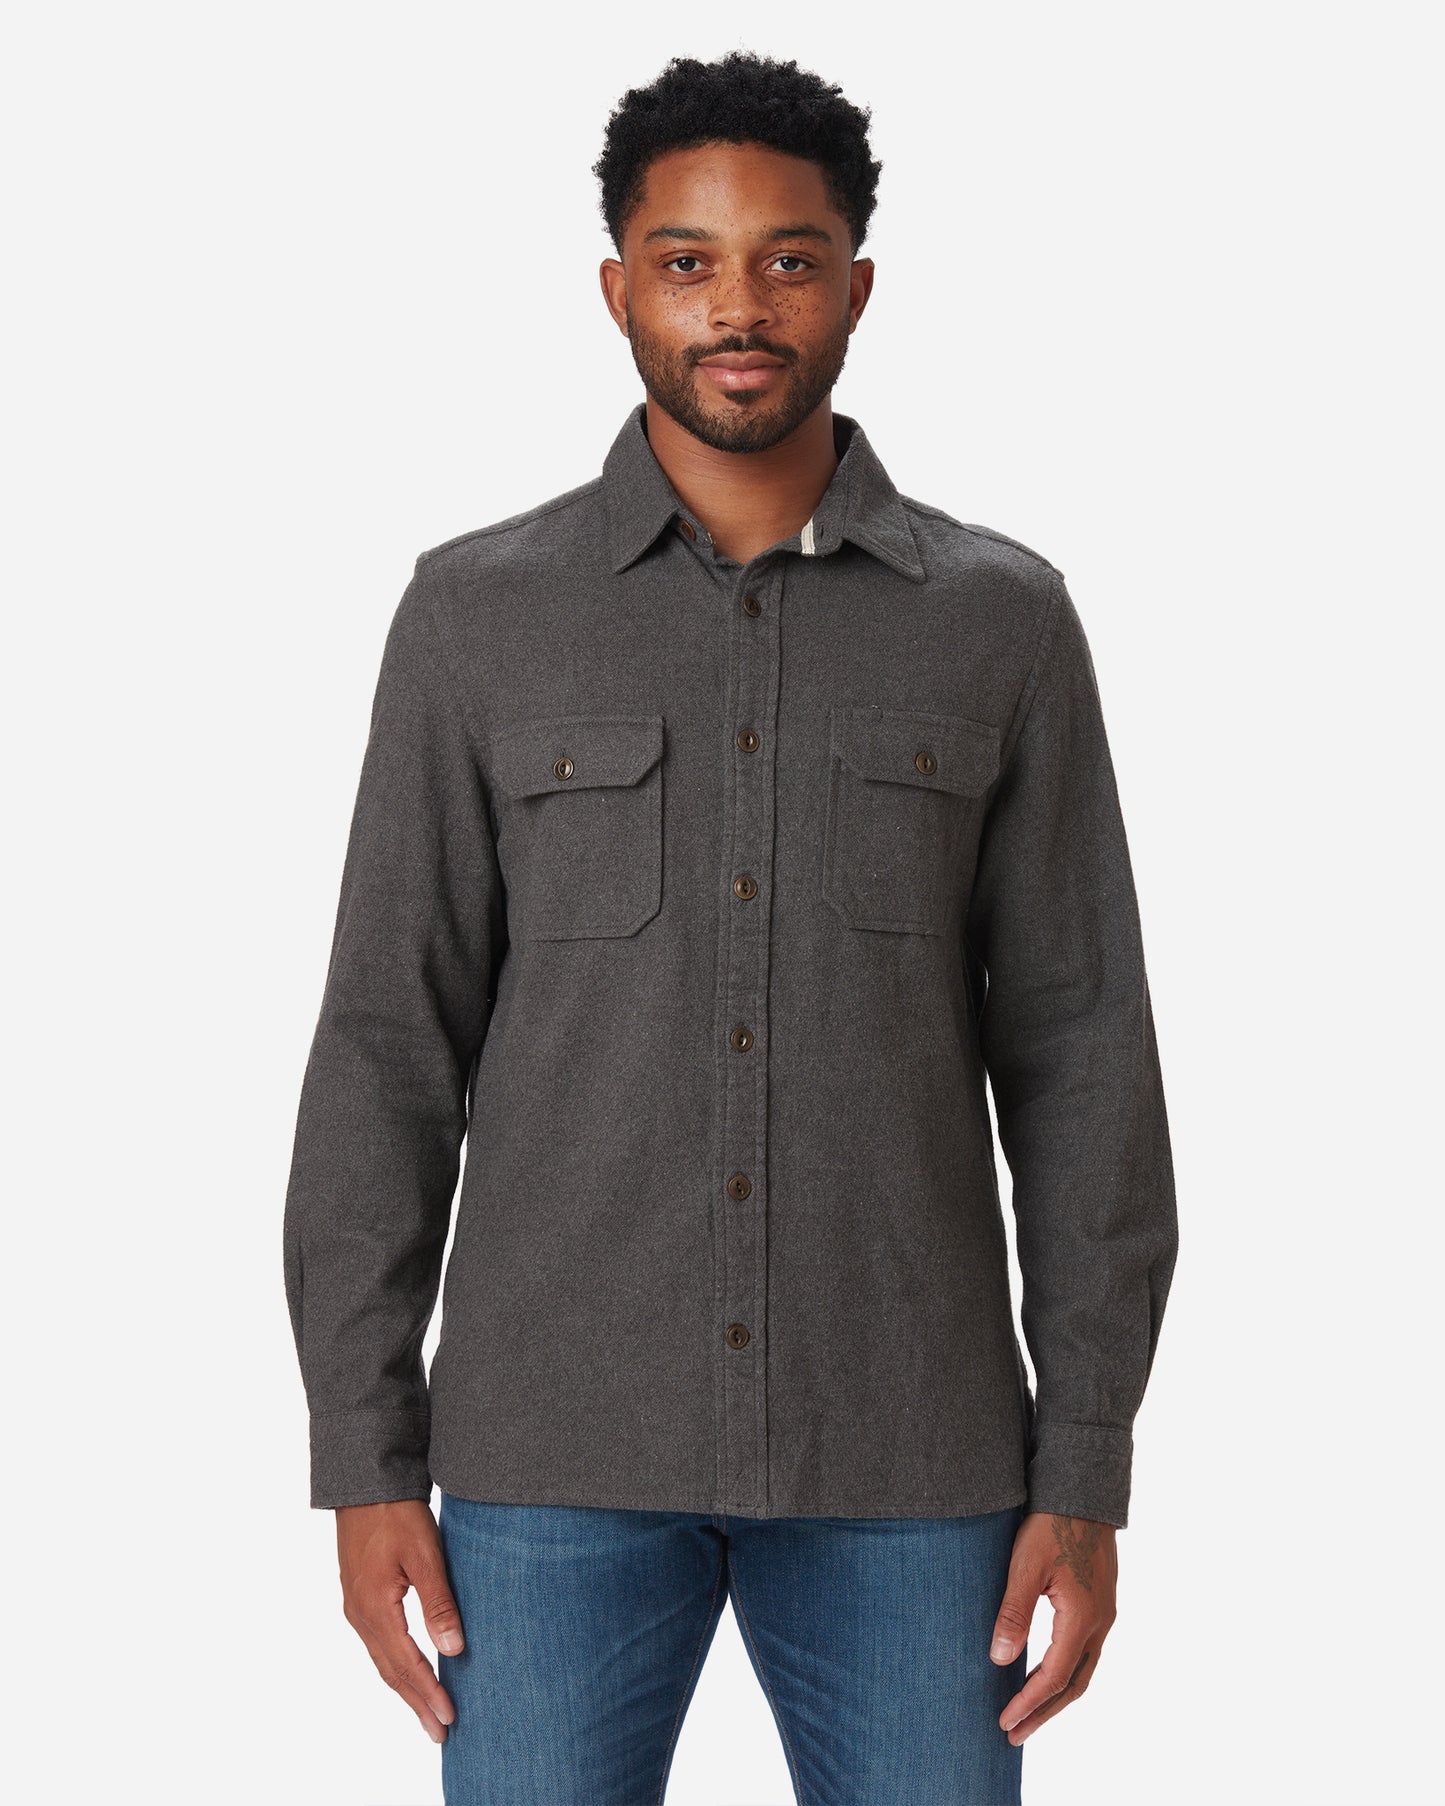 Flannel - Utility Shirt - Charcoal Heather